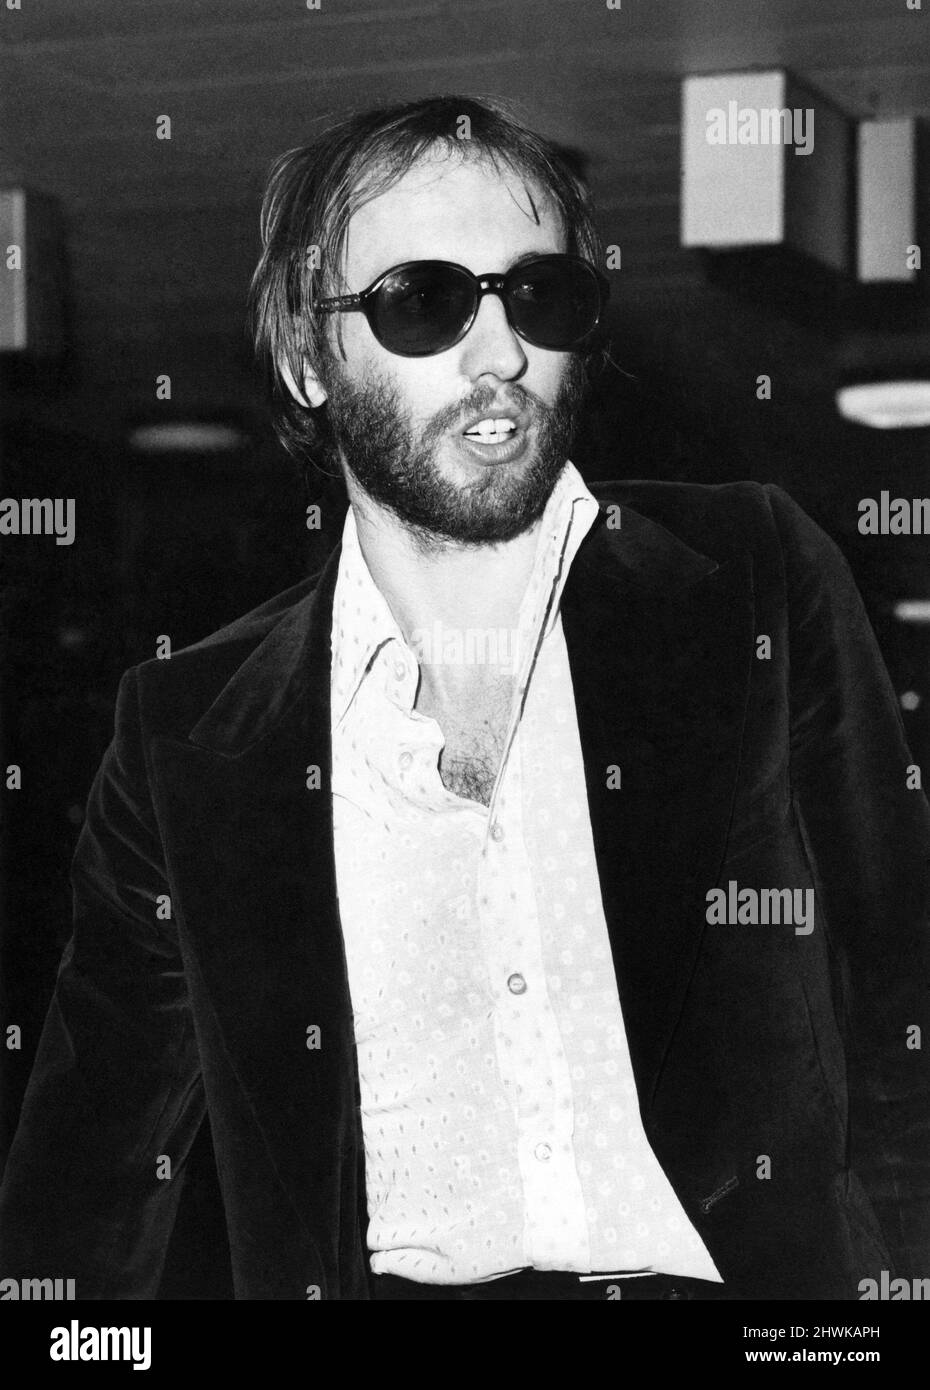 Maurice Gibb of the Bee Gees pop group leaves for Ibiza. Heathrow Airport. April 1973. Stock Photo